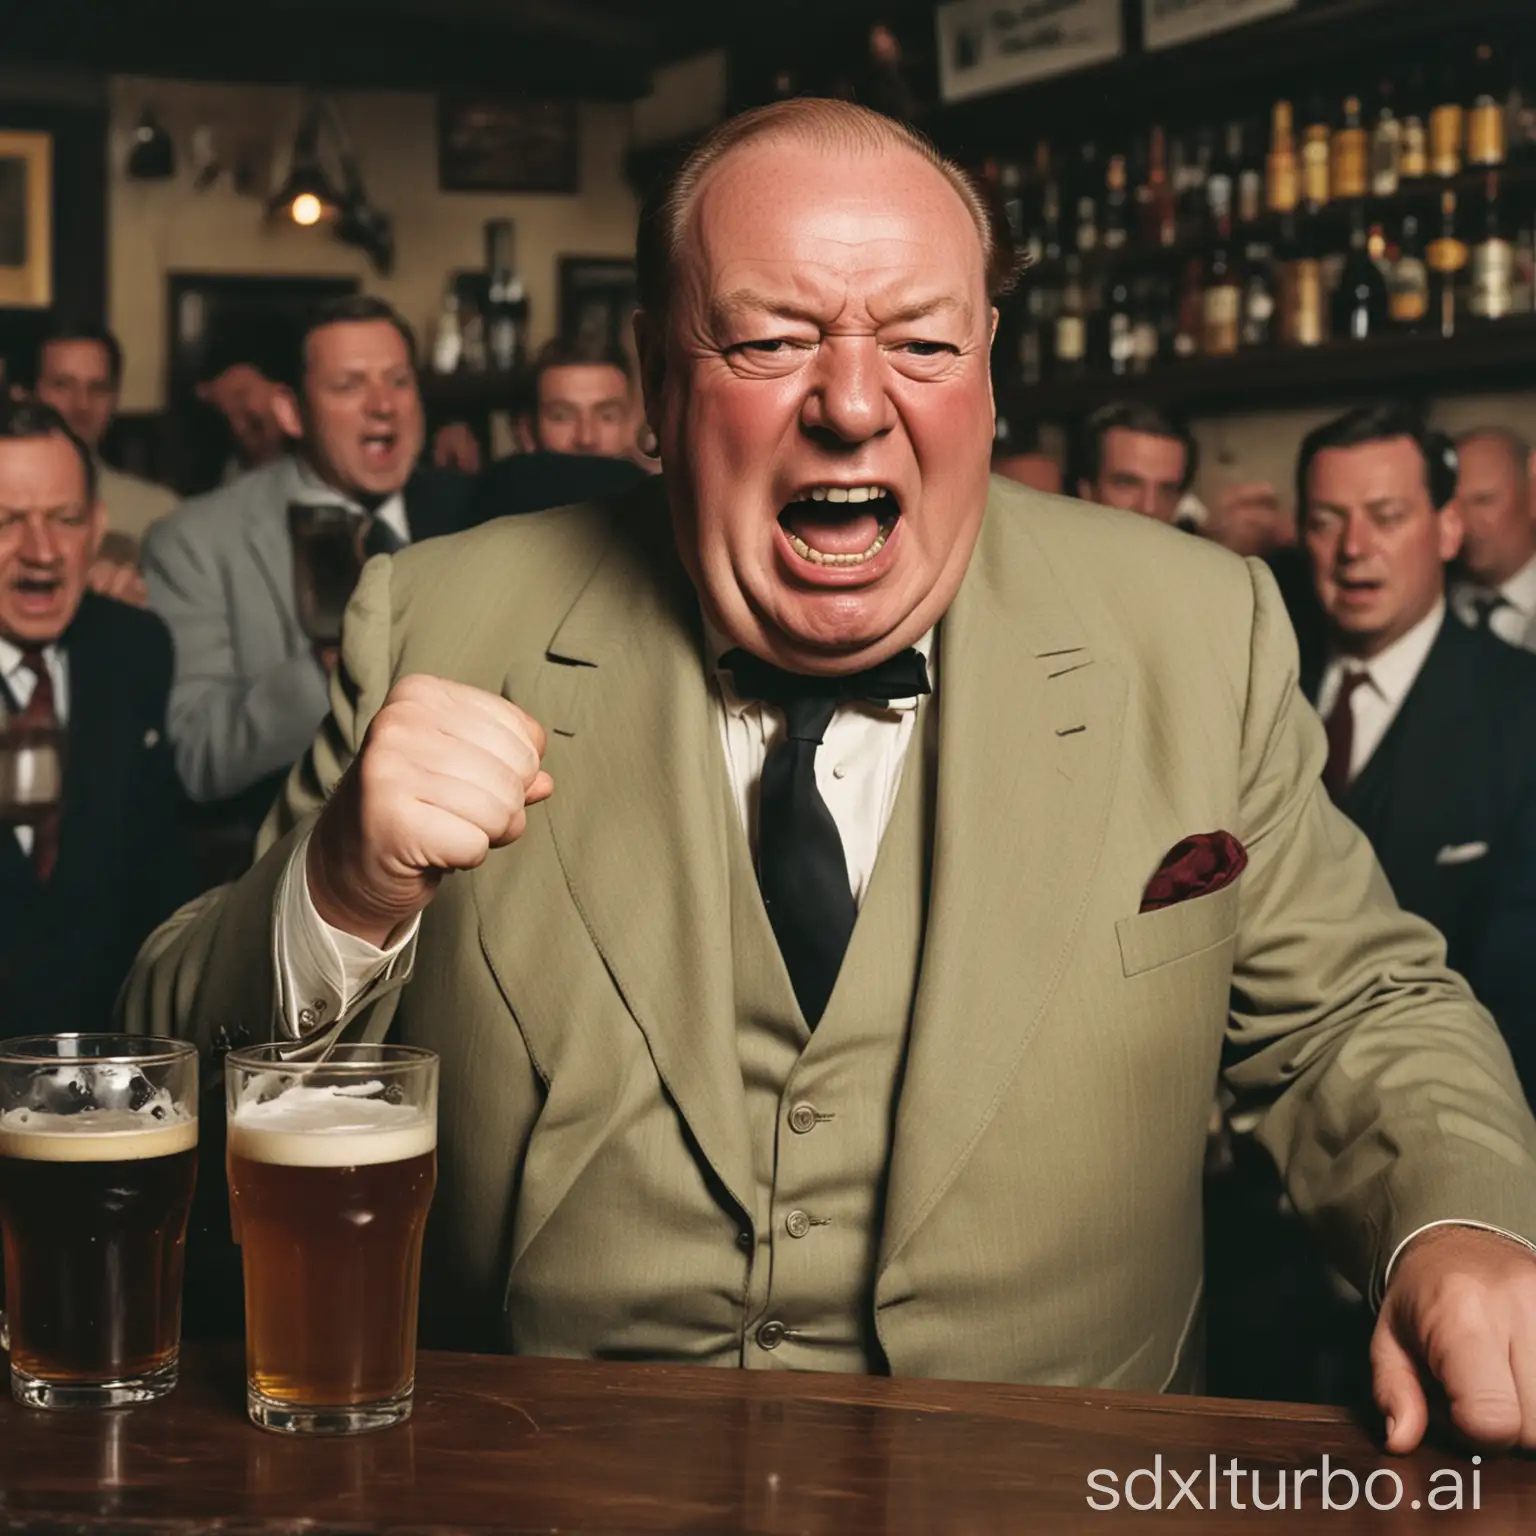 Old color photo of angry Winston Churchill screaming and shaking his fist in a bar, pint of beer in front of him